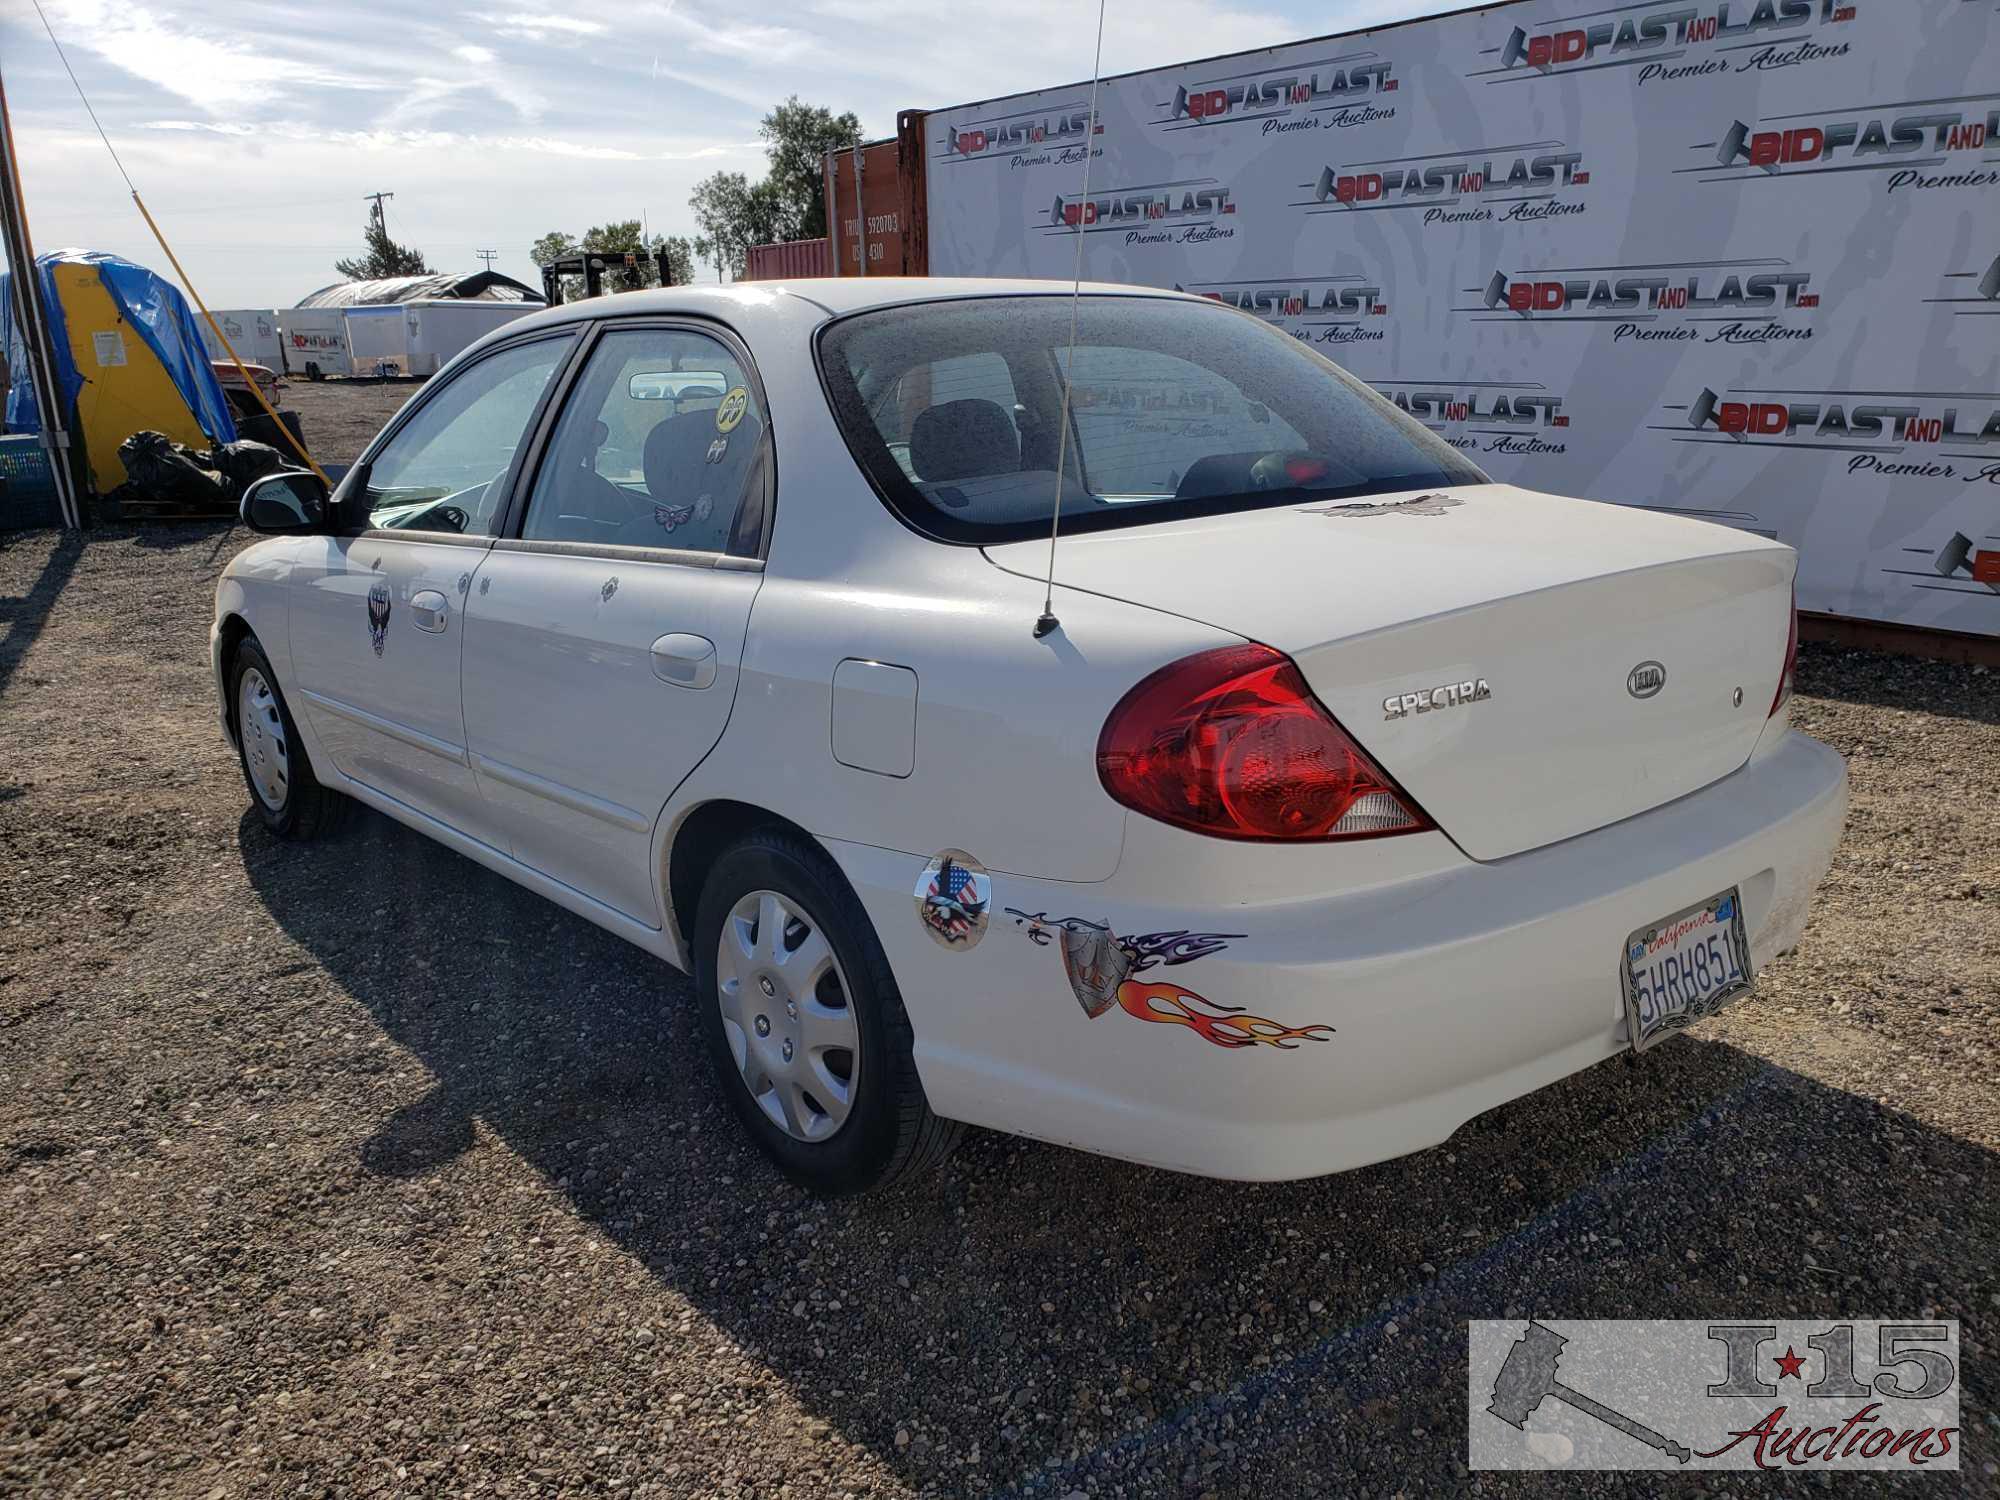 2003 Kia Spectra, White, See Video! DEALER OR OUT OF STATE BUYER ONLY !!